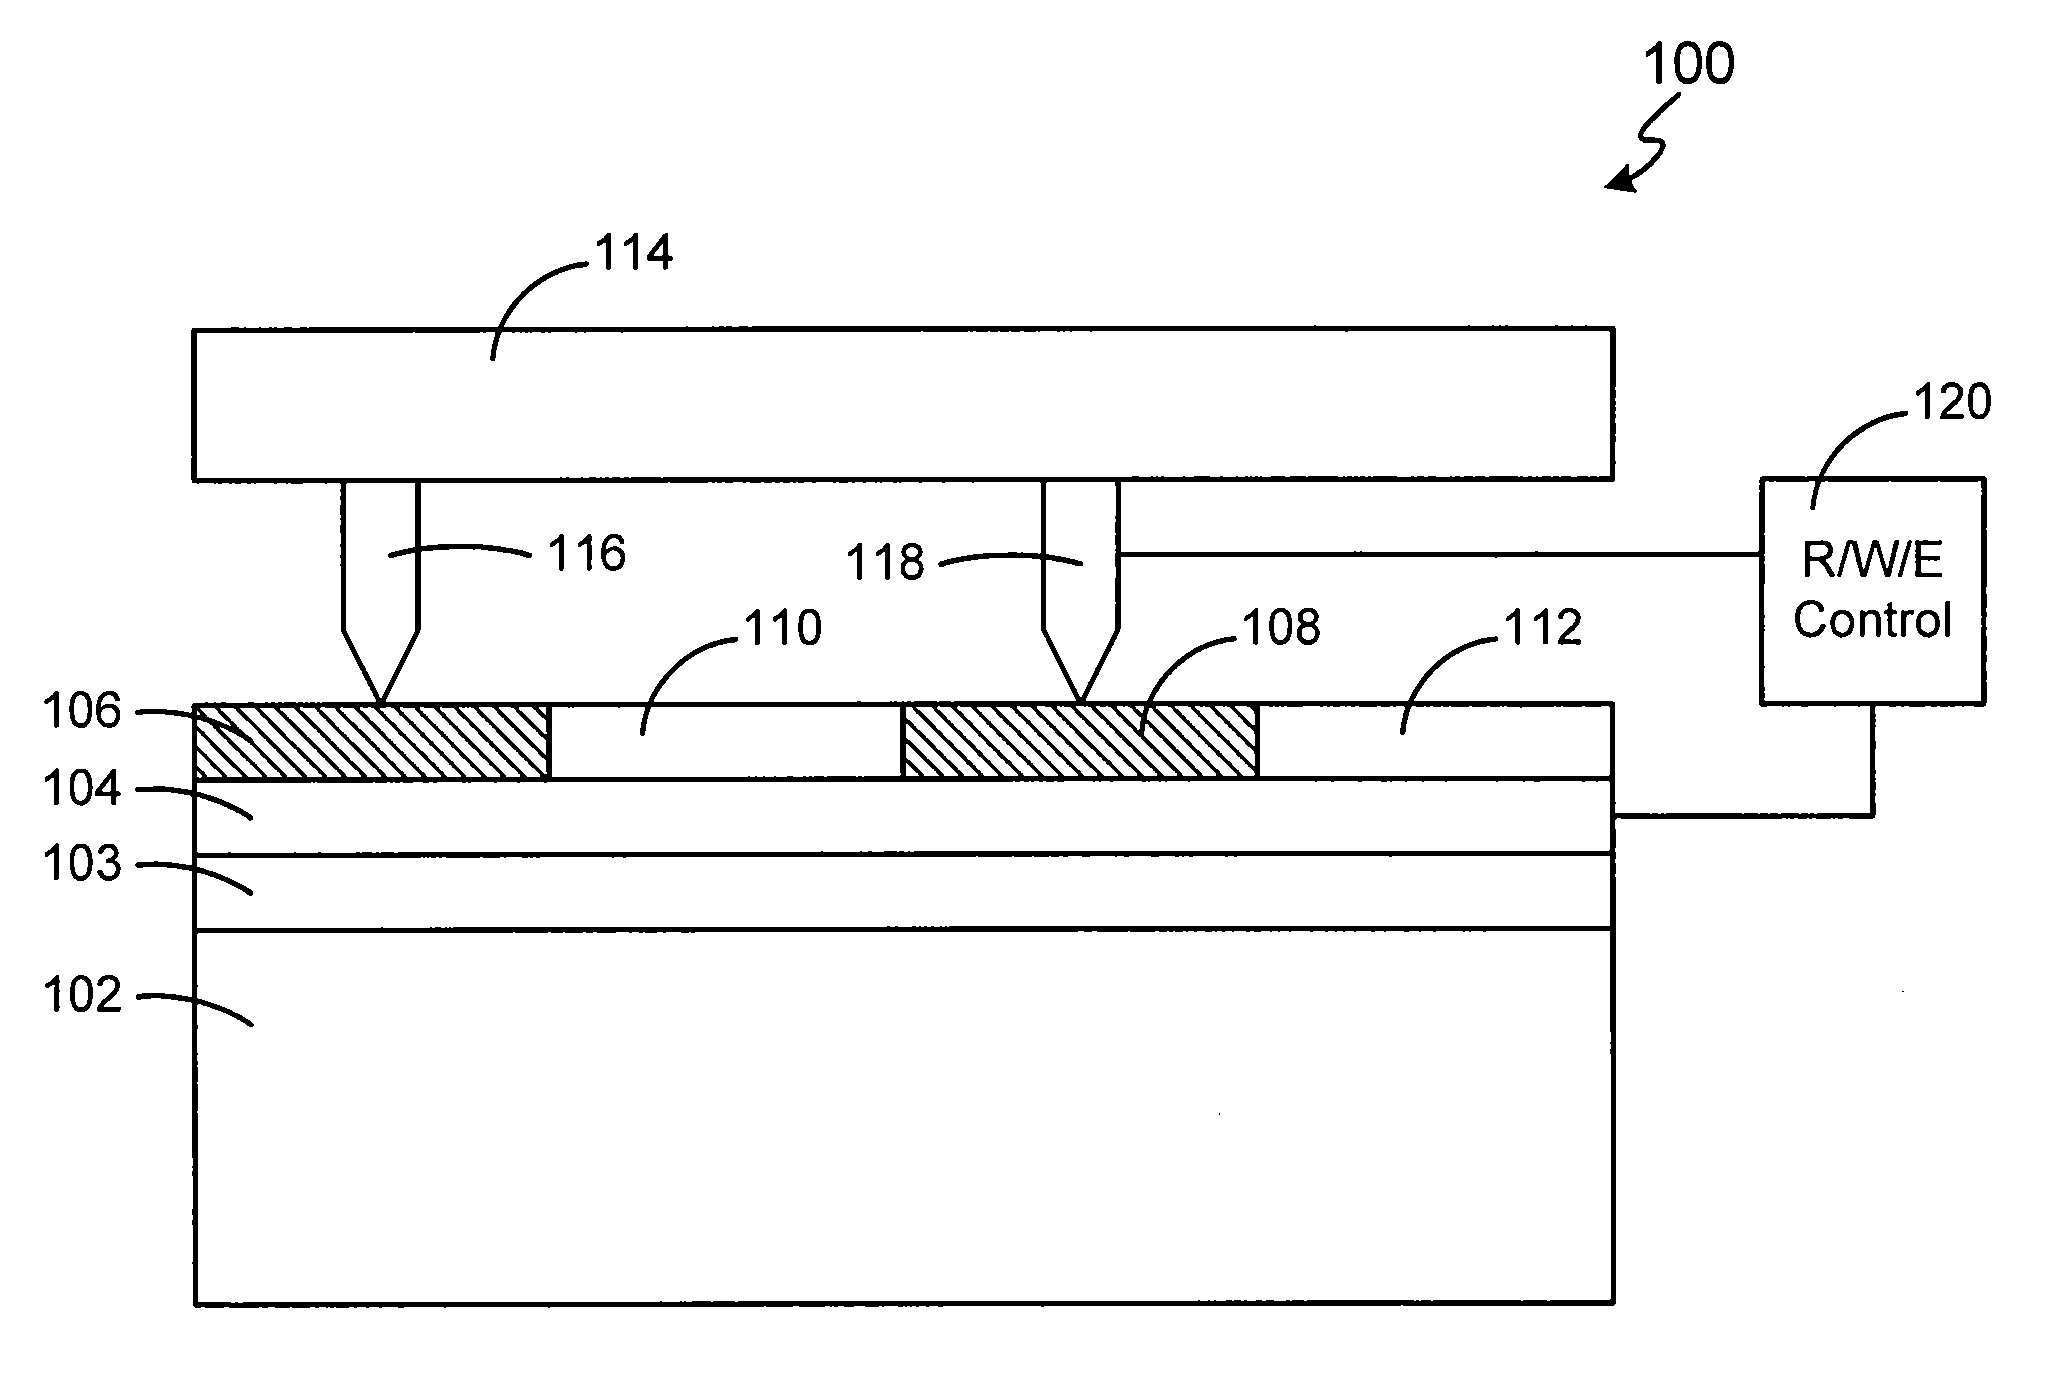 Probe storage device, system including the device, and methods of forming and using same